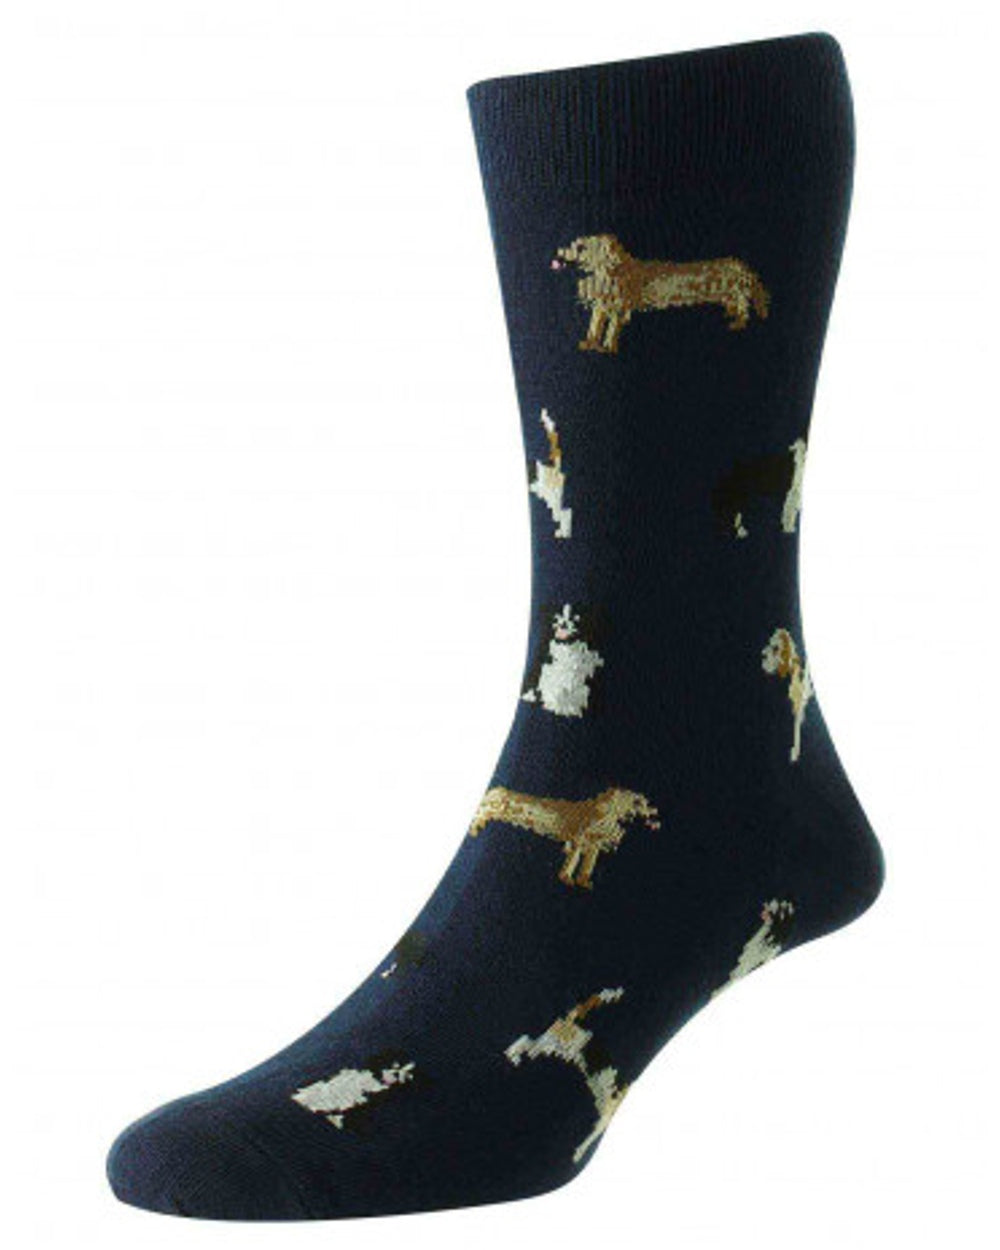 HJ Hall Mens Country Dogs Motif Cotton Rich Socks in Navy 